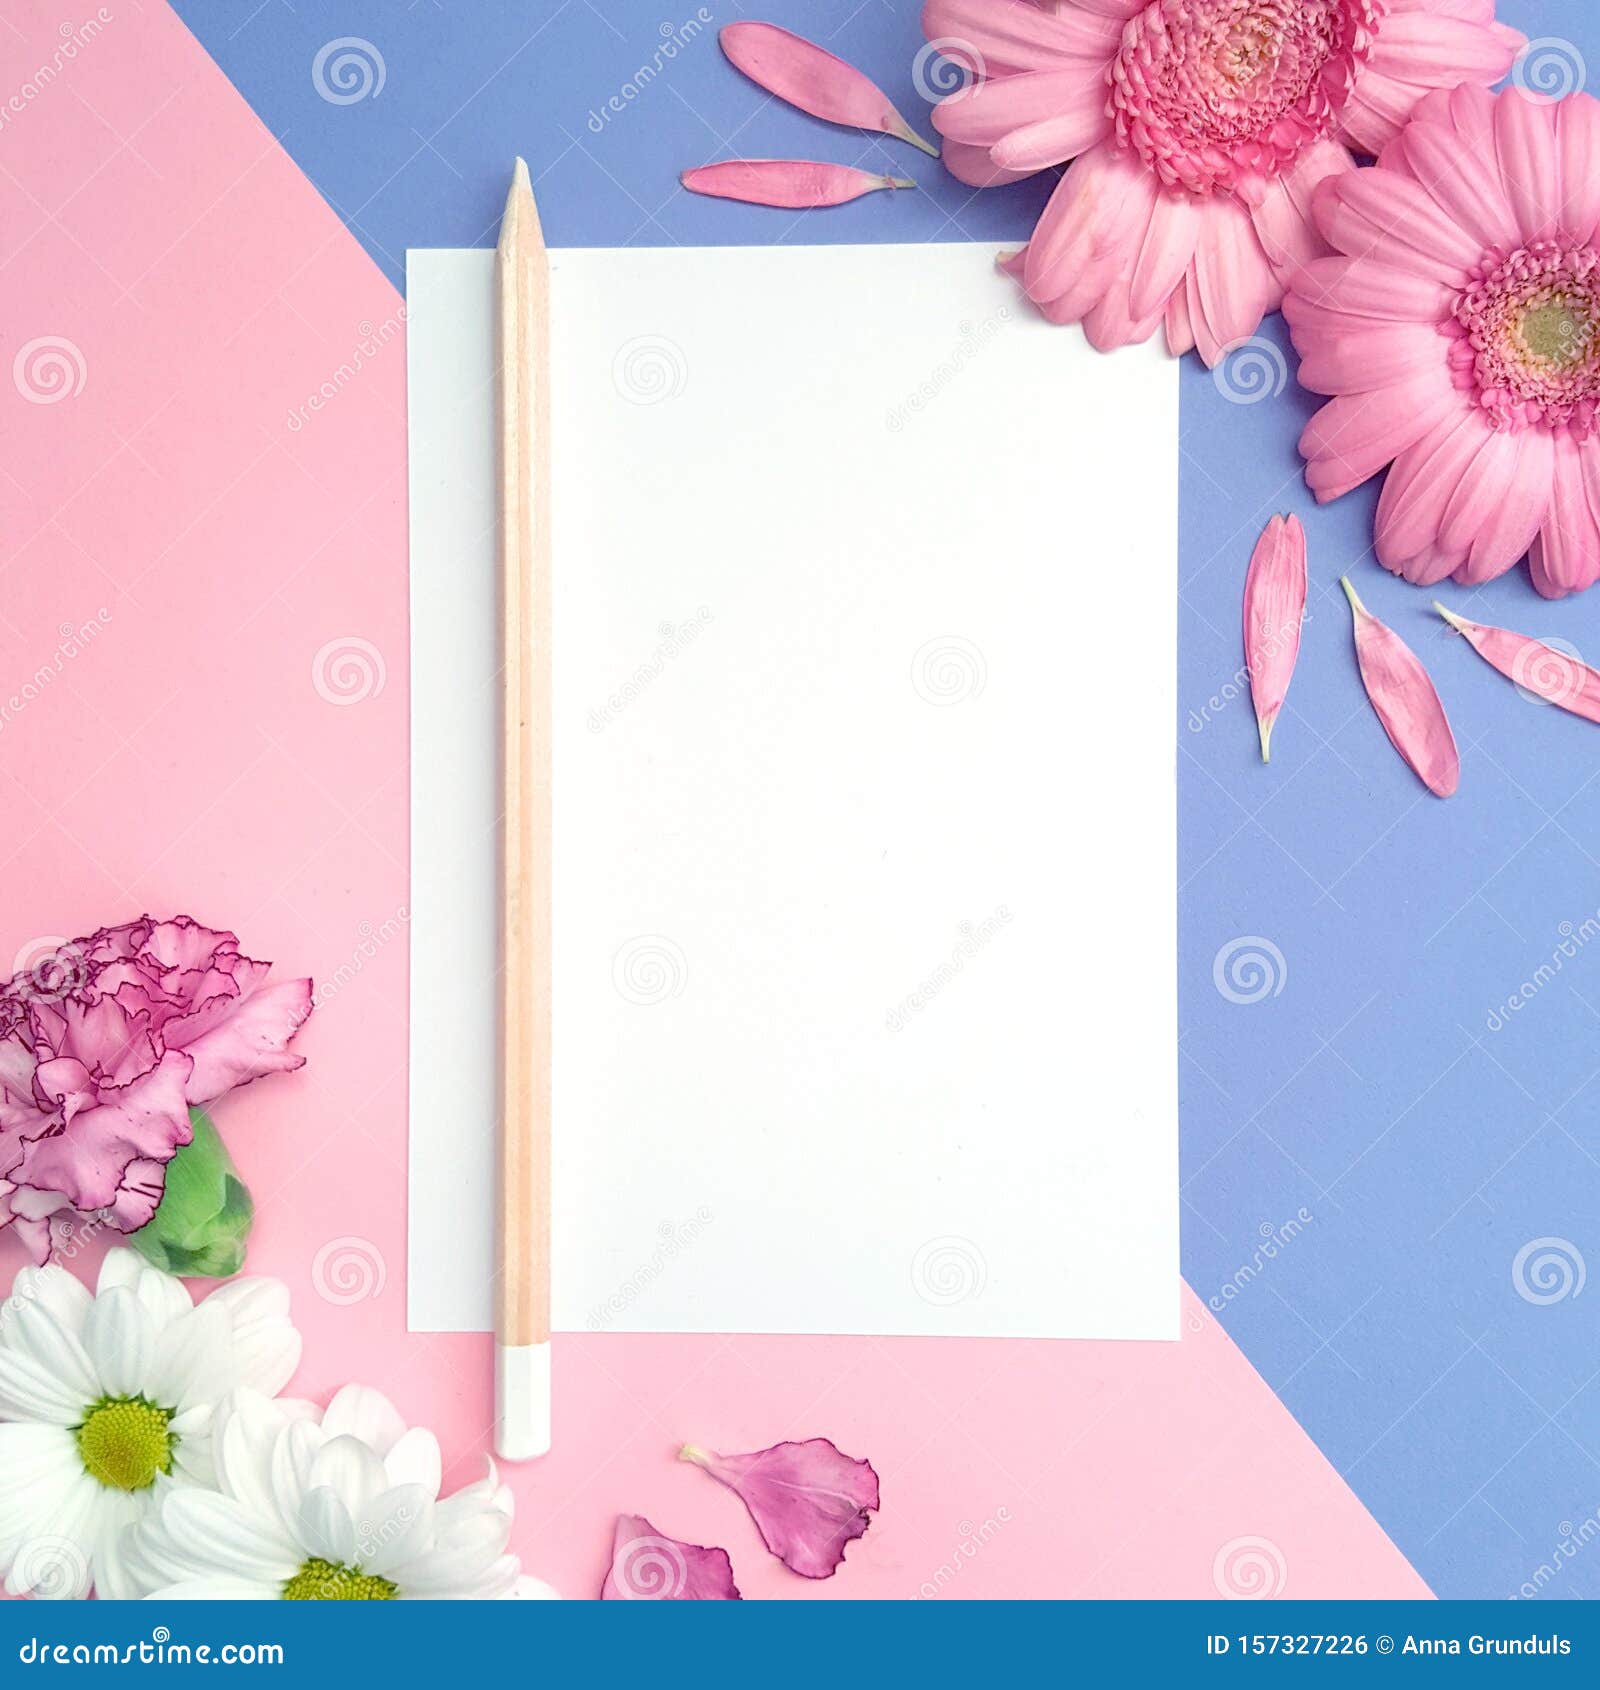 Download White Paper Note Card Mockup On Pink And Purple Stock Photo Image Of Blank Mockup 157327226 PSD Mockup Templates